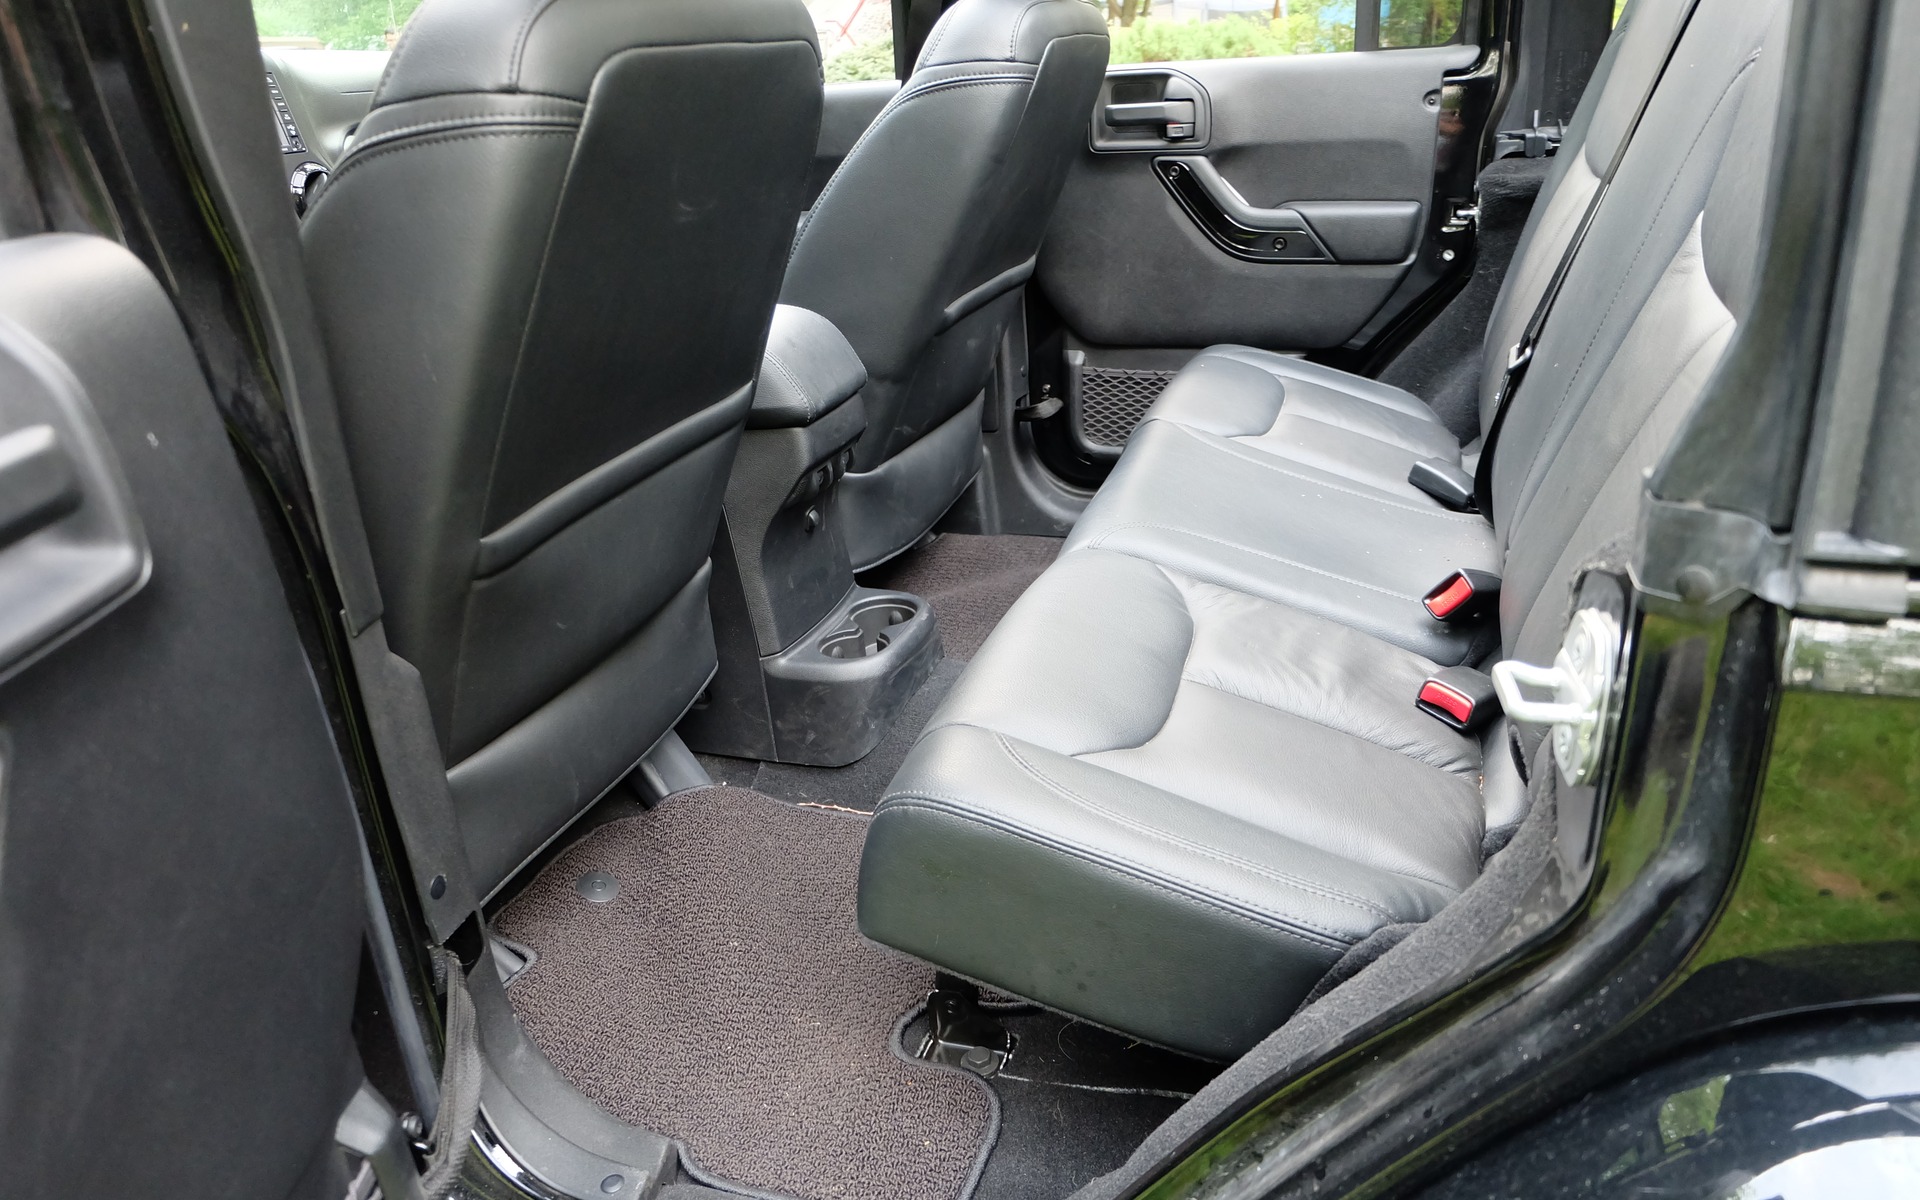 4 doors and comfortable rear seats: a first for the Wrangler.